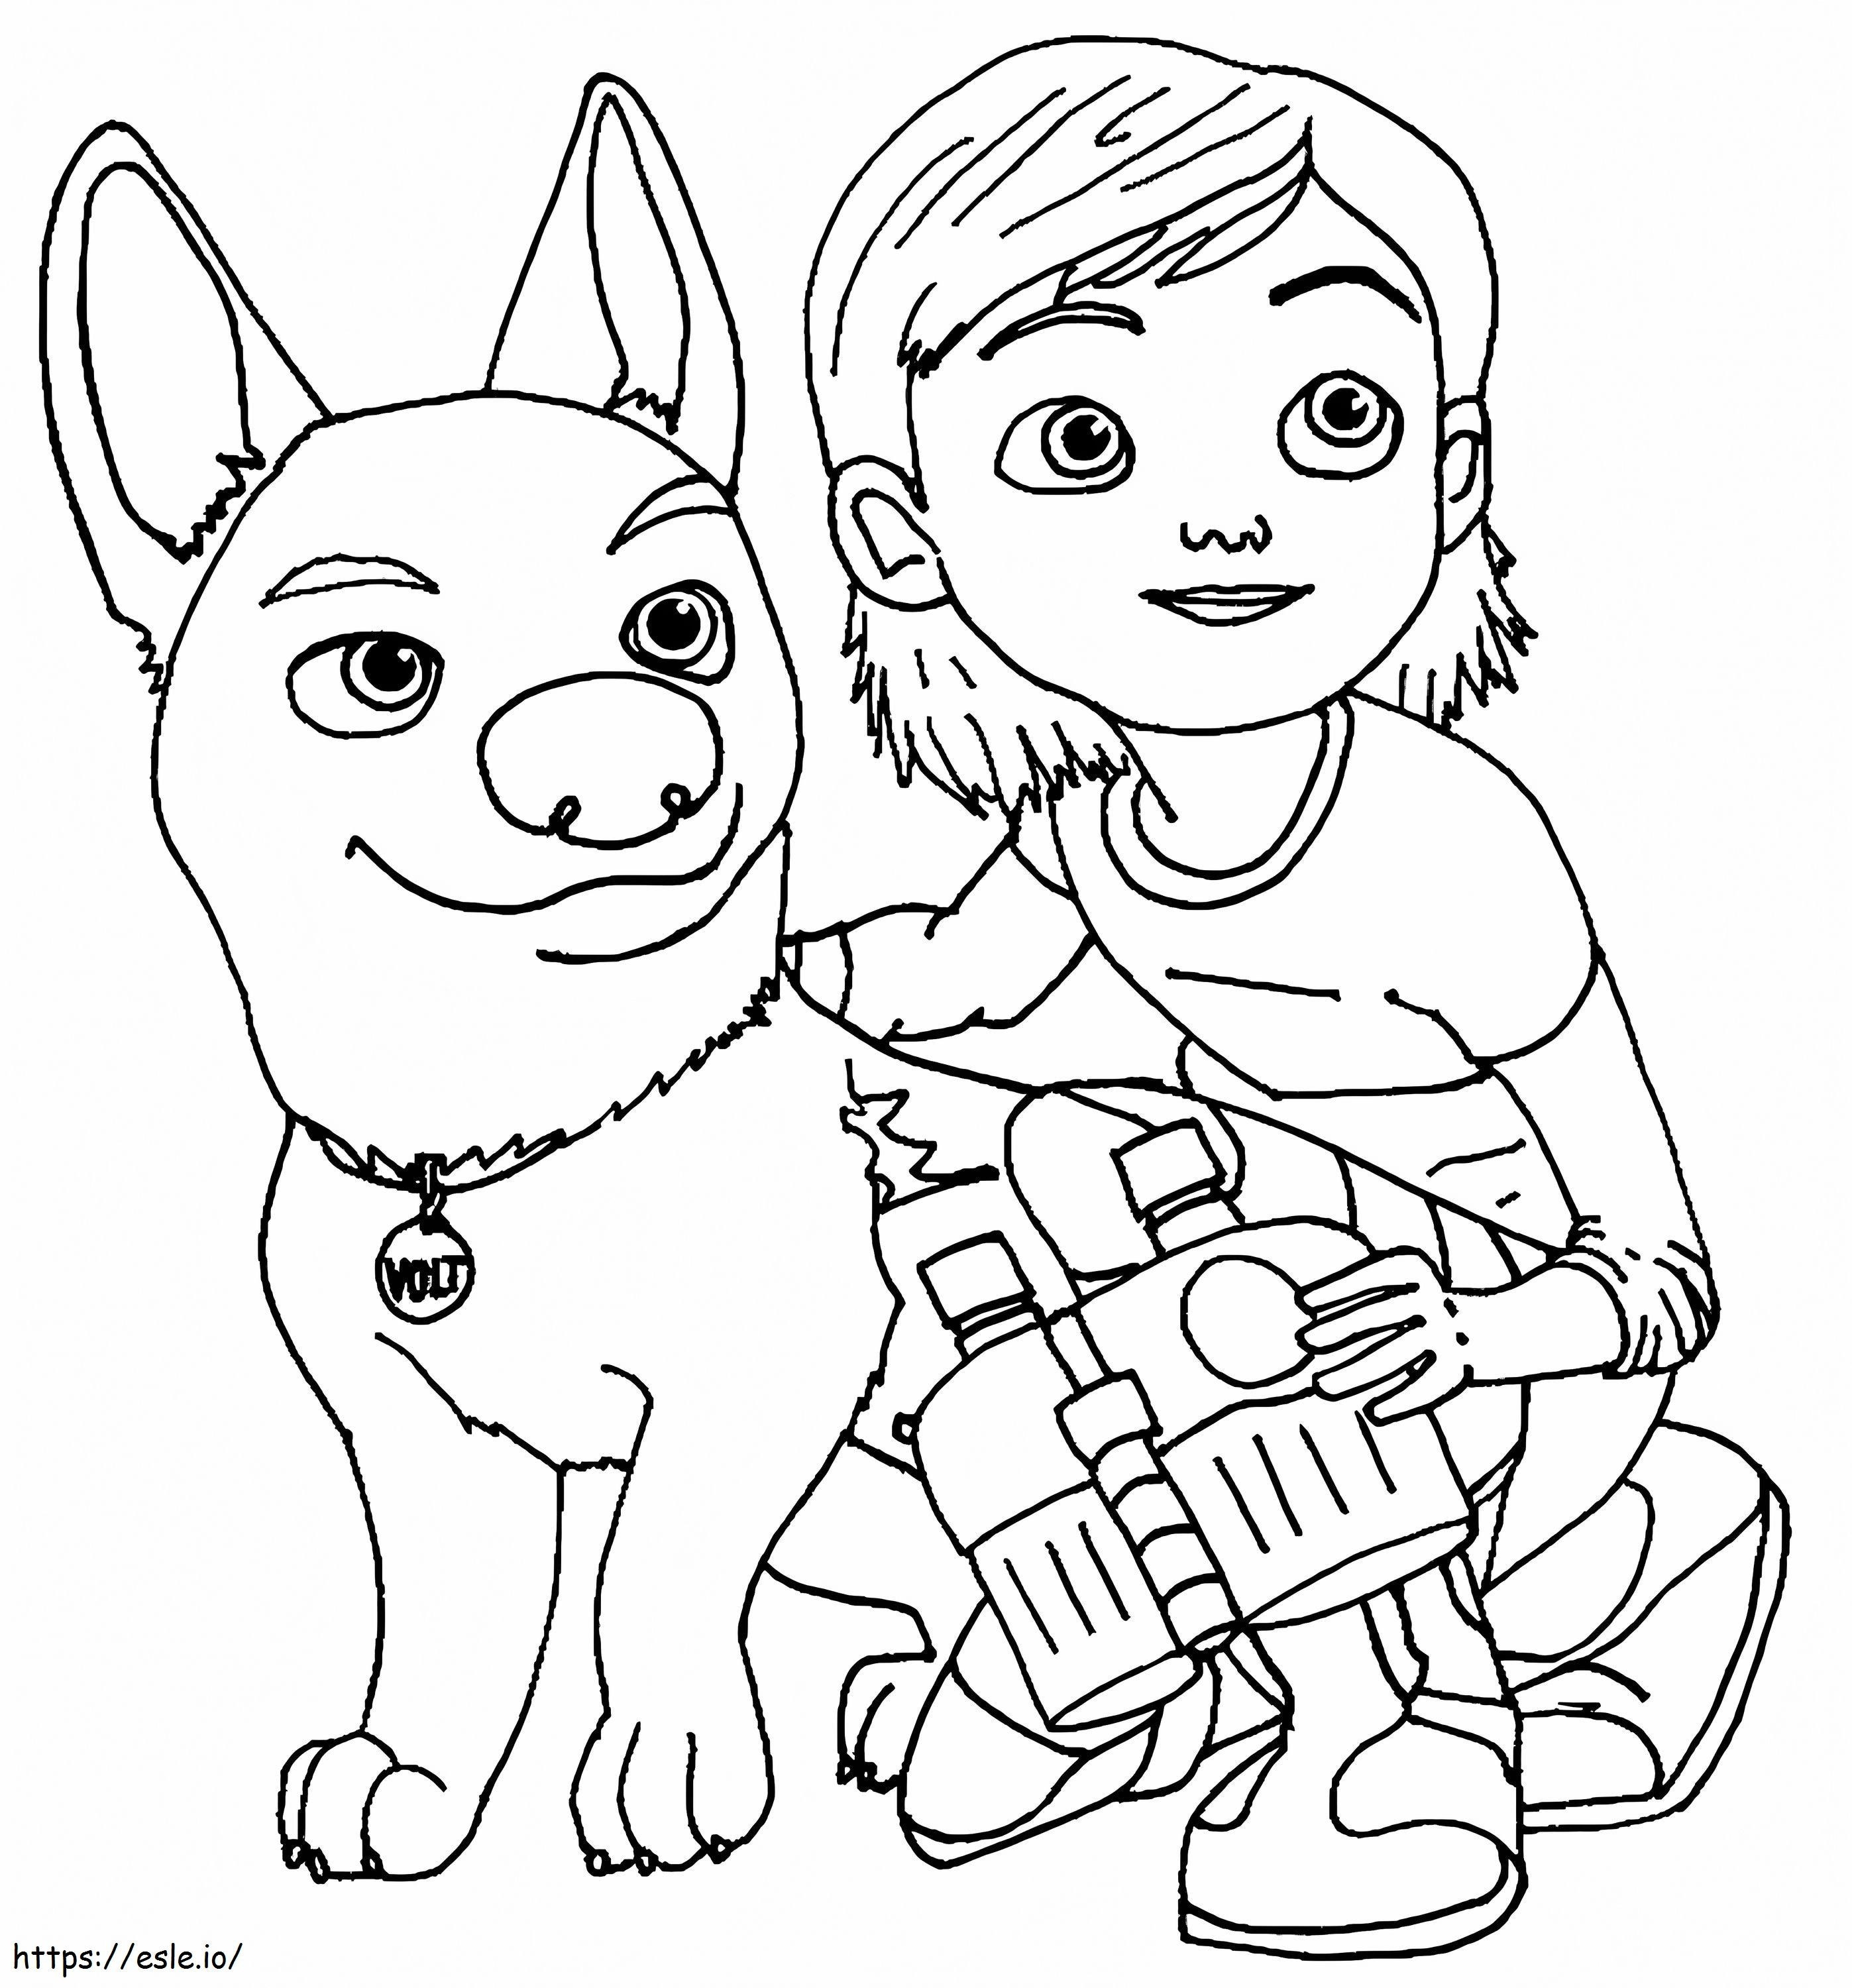 1539567469 Bolt coloring page